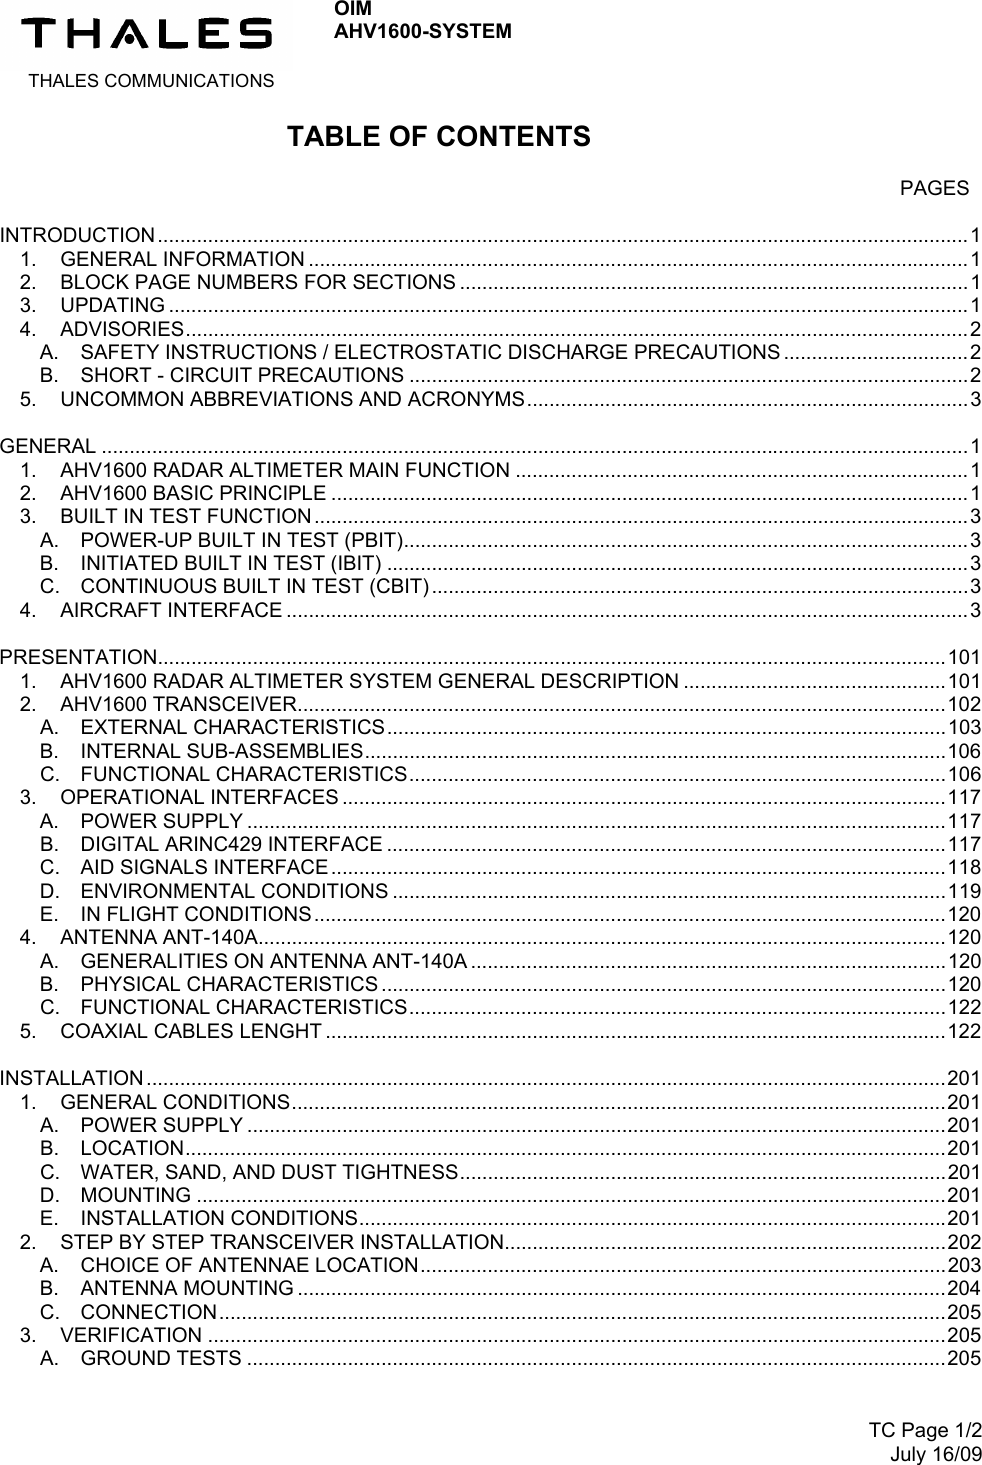  THALES COMMUNICATIONS OIM AHV1600-SYSTEM      TC Page 1/2July 16/09 TABLE OF CONTENTS   PAGES INTRODUCTION .................................................................................................................................................11. GENERAL INFORMATION ......................................................................................................................12. BLOCK PAGE NUMBERS FOR SECTIONS ...........................................................................................13. UPDATING ...............................................................................................................................................14. ADVISORIES............................................................................................................................................2A. SAFETY INSTRUCTIONS / ELECTROSTATIC DISCHARGE PRECAUTIONS .................................2B. SHORT - CIRCUIT PRECAUTIONS ....................................................................................................25. UNCOMMON ABBREVIATIONS AND ACRONYMS...............................................................................3GENERAL ...........................................................................................................................................................11. AHV1600 RADAR ALTIMETER MAIN FUNCTION .................................................................................12. AHV1600 BASIC PRINCIPLE ..................................................................................................................13. BUILT IN TEST FUNCTION.....................................................................................................................3A. POWER-UP BUILT IN TEST (PBIT).....................................................................................................3B. INITIATED BUILT IN TEST (IBIT) ........................................................................................................3C. CONTINUOUS BUILT IN TEST (CBIT) ................................................................................................34. AIRCRAFT INTERFACE ..........................................................................................................................3PRESENTATION.............................................................................................................................................1011. AHV1600 RADAR ALTIMETER SYSTEM GENERAL DESCRIPTION ...............................................1012. AHV1600 TRANSCEIVER....................................................................................................................102A. EXTERNAL CHARACTERISTICS....................................................................................................103B. INTERNAL SUB-ASSEMBLIES........................................................................................................106C. FUNCTIONAL CHARACTERISTICS................................................................................................1063. OPERATIONAL INTERFACES ............................................................................................................117A. POWER SUPPLY .............................................................................................................................117B. DIGITAL ARINC429 INTERFACE ....................................................................................................117C. AID SIGNALS INTERFACE..............................................................................................................118D. ENVIRONMENTAL CONDITIONS ...................................................................................................119E. IN FLIGHT CONDITIONS.................................................................................................................1204. ANTENNA ANT-140A...........................................................................................................................120A. GENERALITIES ON ANTENNA ANT-140A .....................................................................................120B. PHYSICAL CHARACTERISTICS .....................................................................................................120C. FUNCTIONAL CHARACTERISTICS................................................................................................1225. COAXIAL CABLES LENGHT ...............................................................................................................122INSTALLATION ...............................................................................................................................................2011. GENERAL CONDITIONS.....................................................................................................................201A. POWER SUPPLY .............................................................................................................................201B. LOCATION........................................................................................................................................201C. WATER, SAND, AND DUST TIGHTNESS.......................................................................................201D. MOUNTING ......................................................................................................................................201E. INSTALLATION CONDITIONS.........................................................................................................2012. STEP BY STEP TRANSCEIVER INSTALLATION...............................................................................202A. CHOICE OF ANTENNAE LOCATION..............................................................................................203B. ANTENNA MOUNTING ....................................................................................................................204C. CONNECTION..................................................................................................................................2053. VERIFICATION ....................................................................................................................................205A. GROUND TESTS .............................................................................................................................205